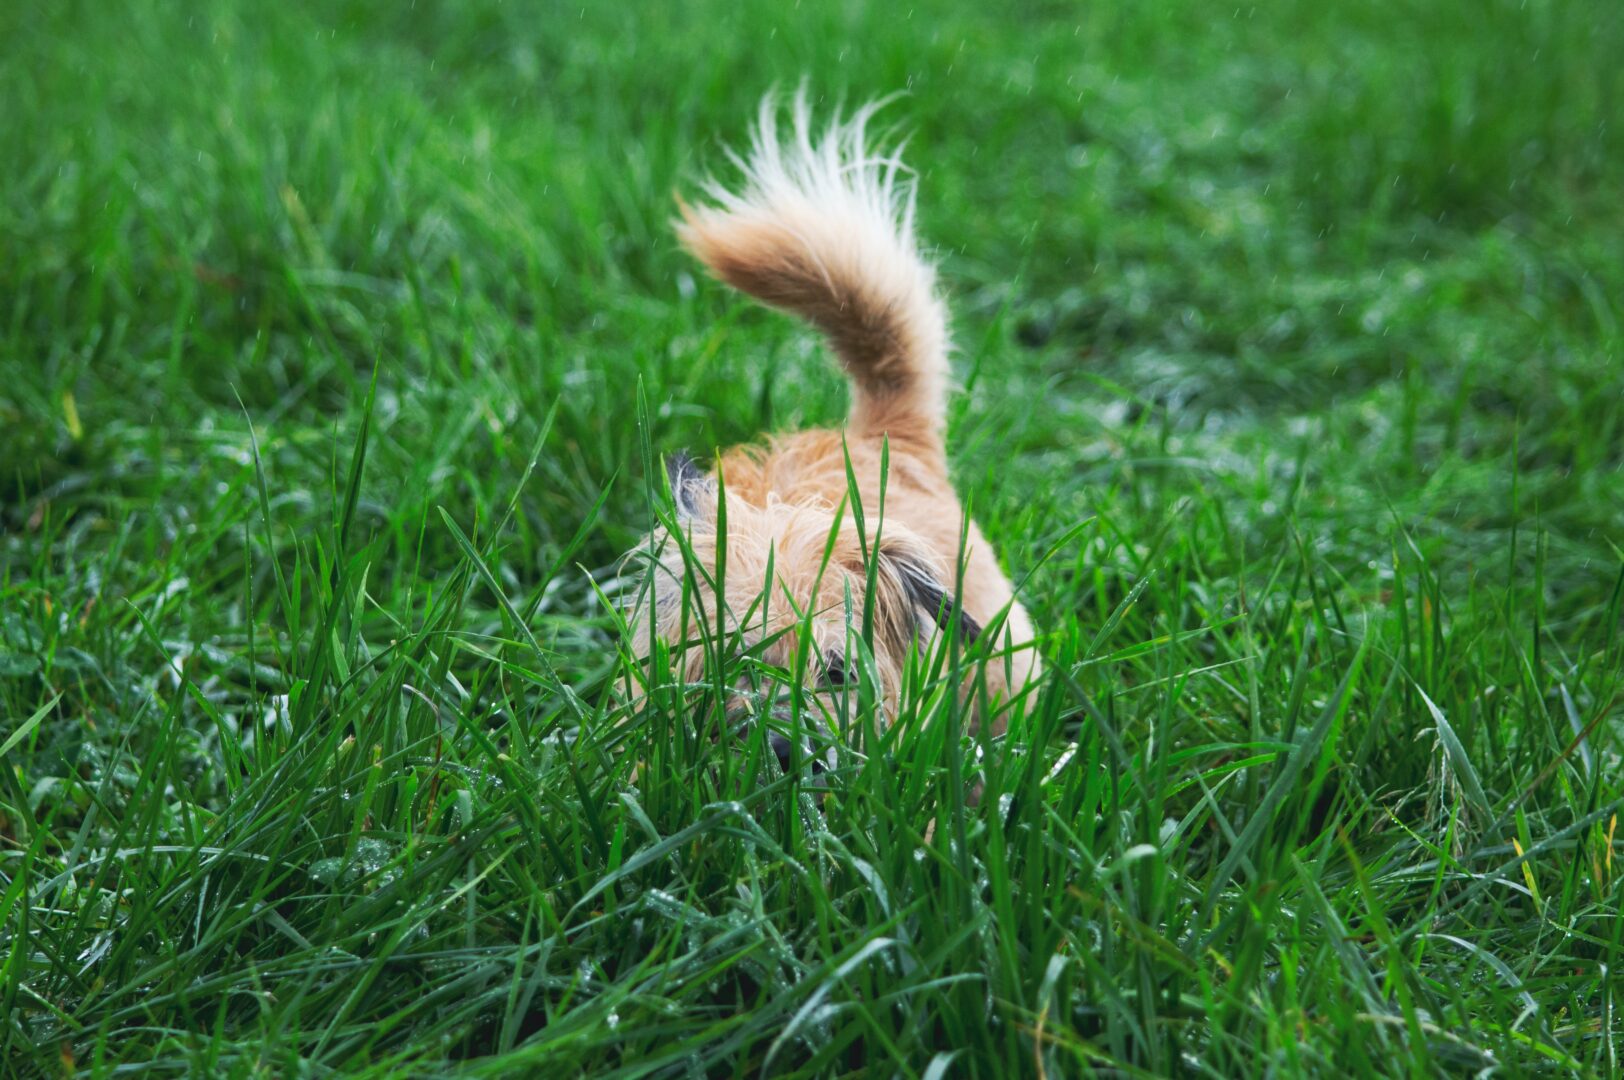 terrier hiding in the grass